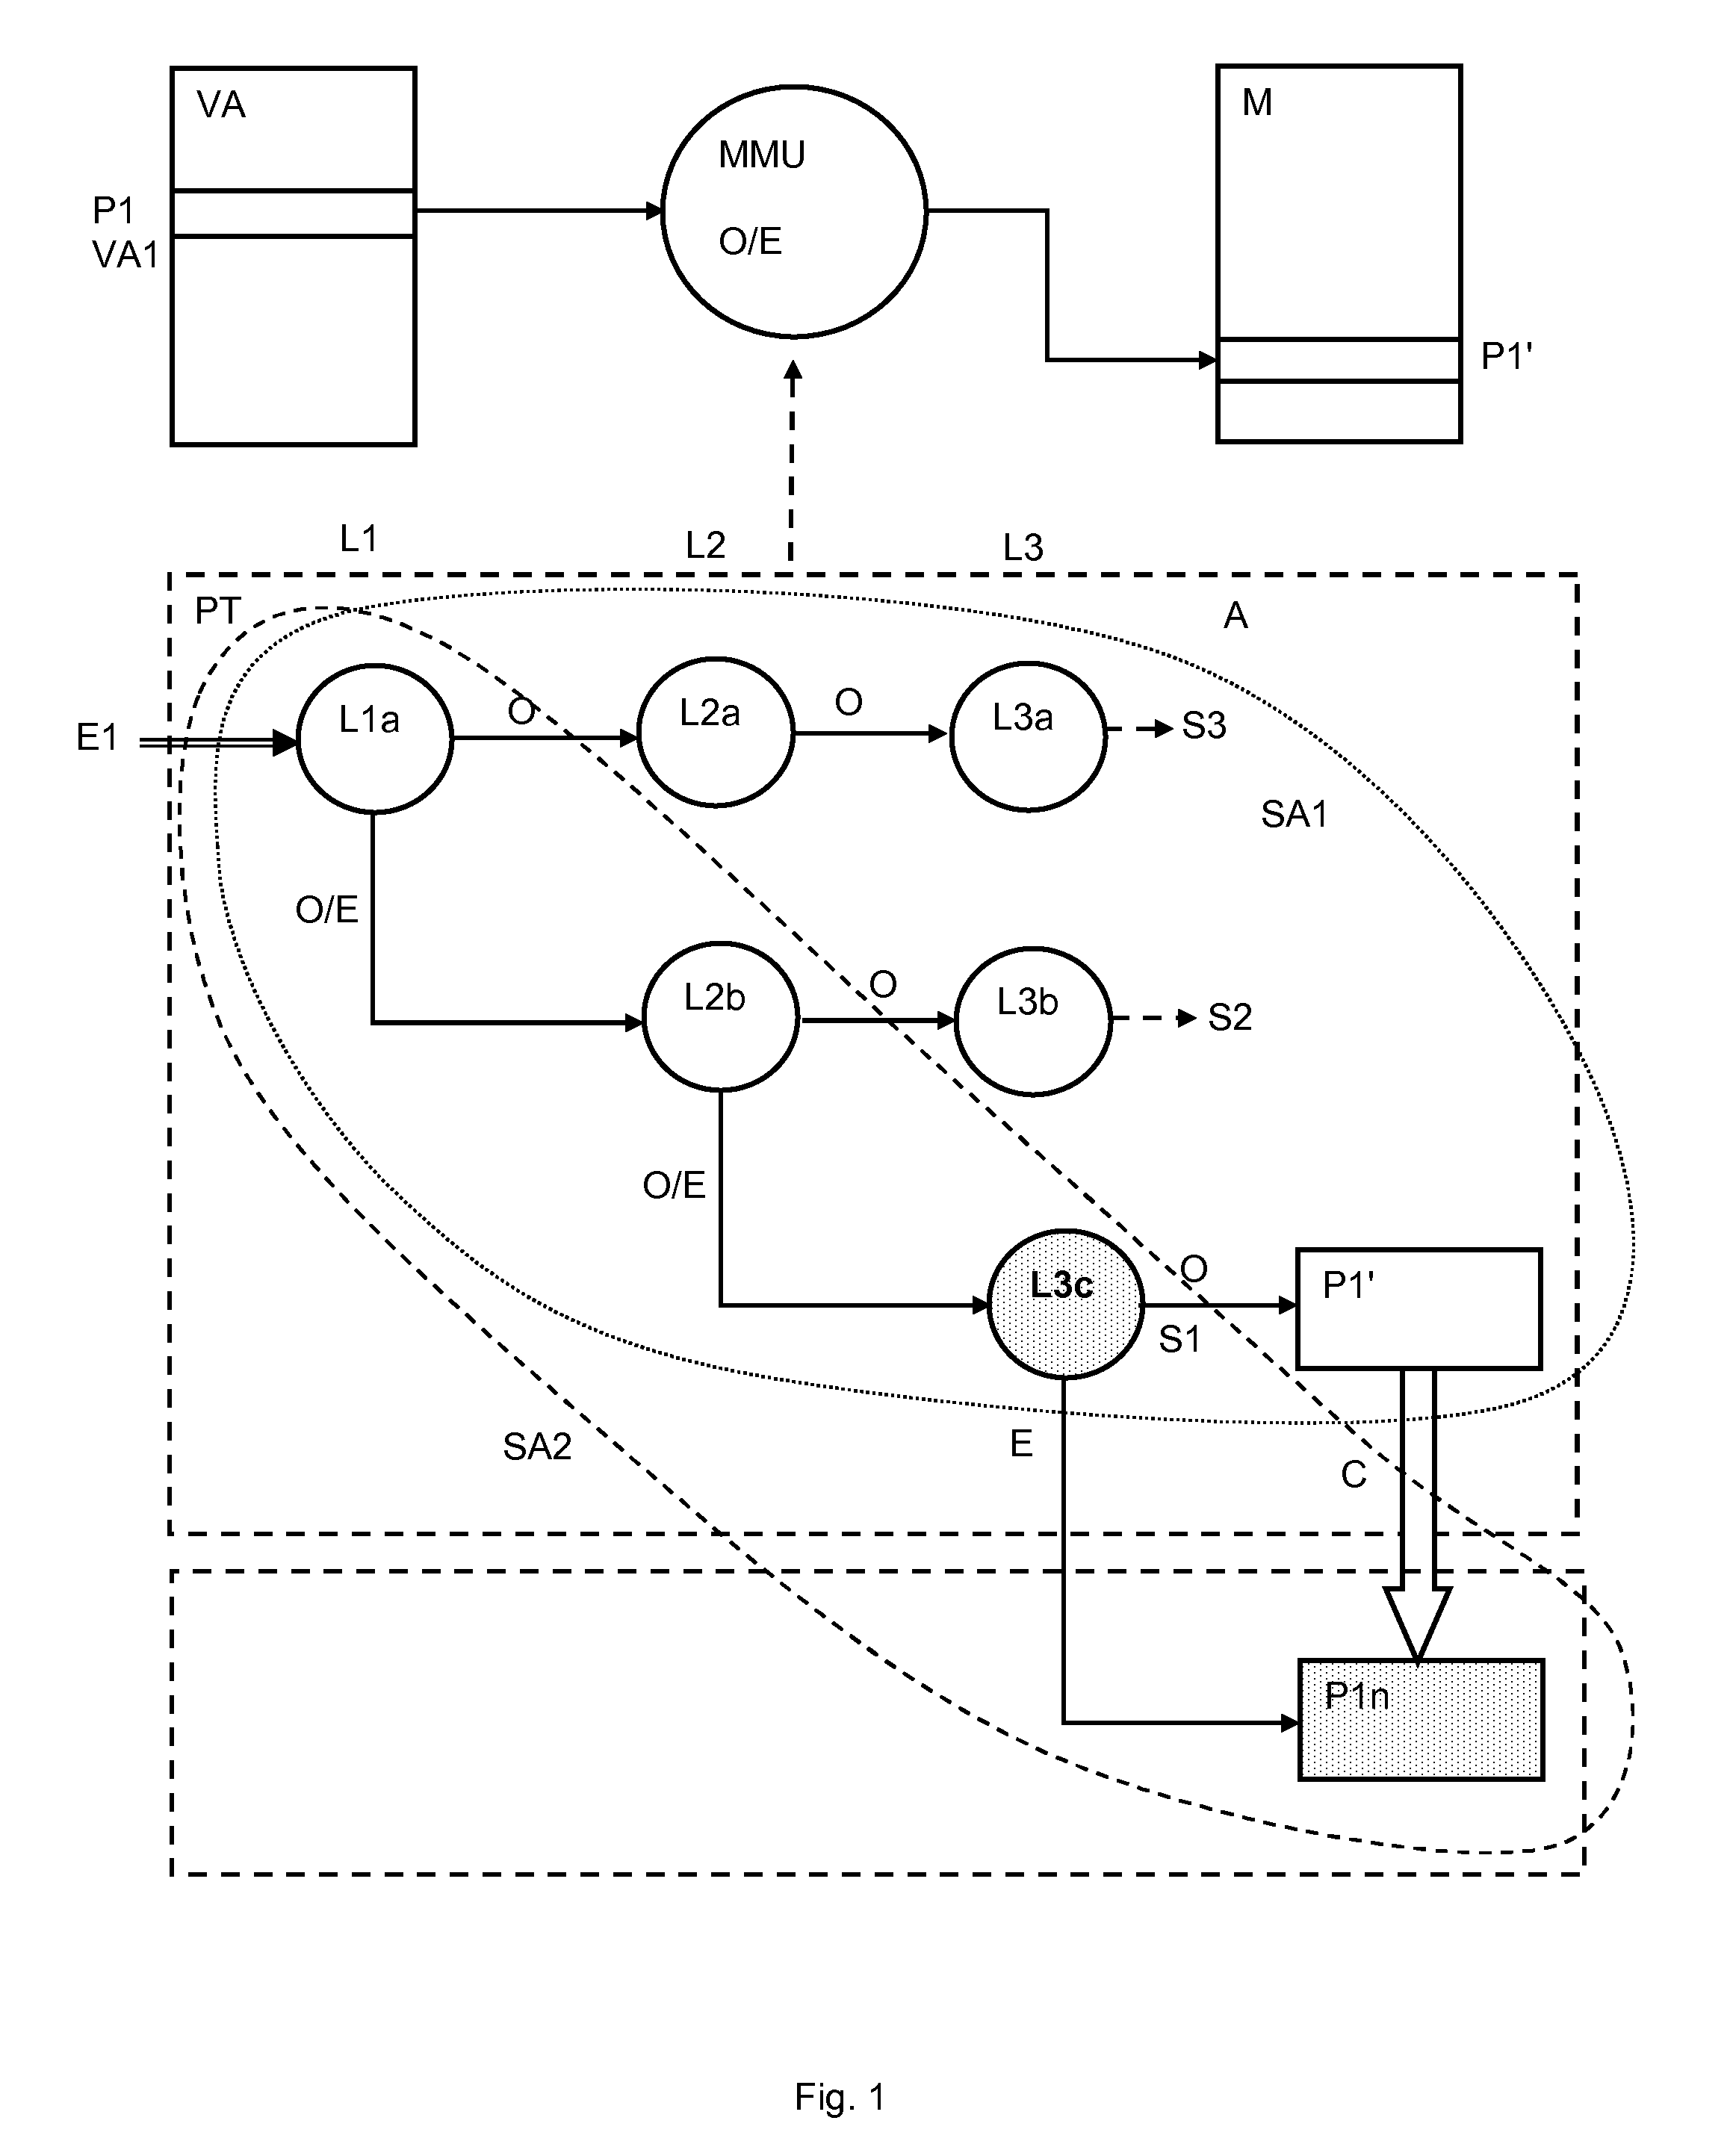 Method for updating data in memories using a memory management unit